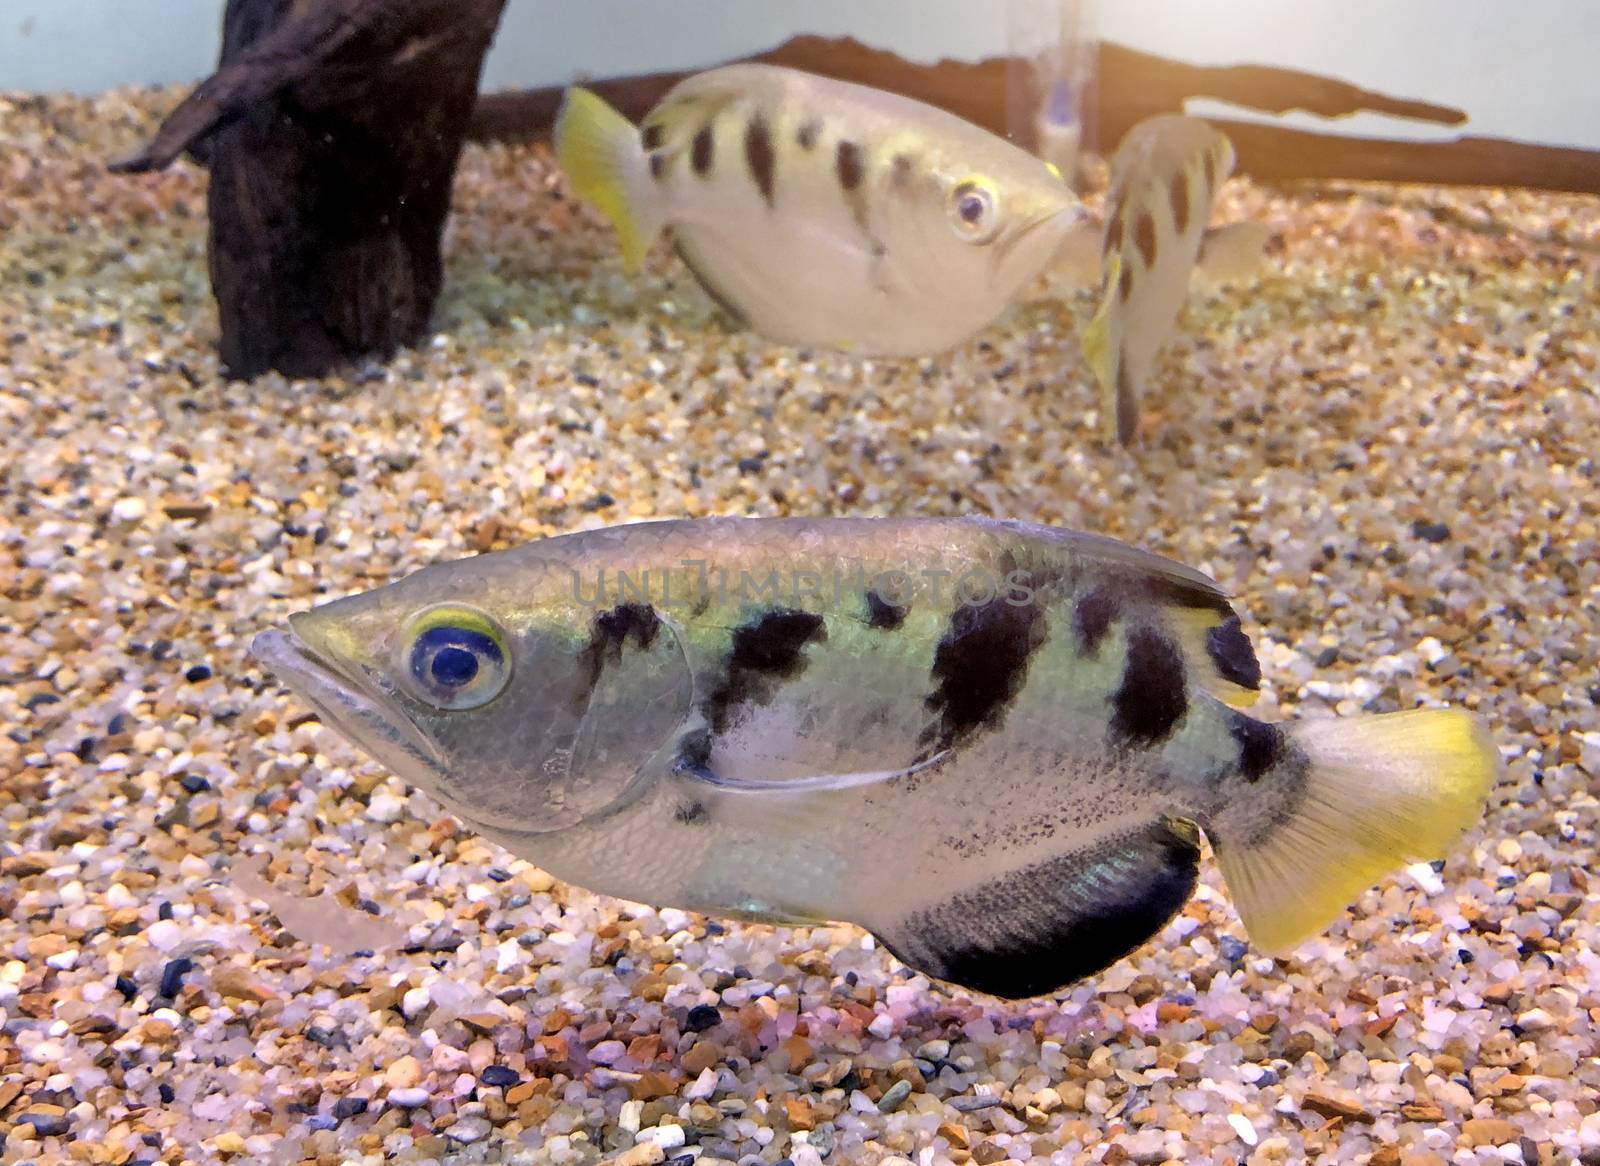 Archer fish or Blowpipe fish (Toxotidae) in aquarium of fish known for their habit of preying on land-based insects and other small animals by shooting them down with water droplets.